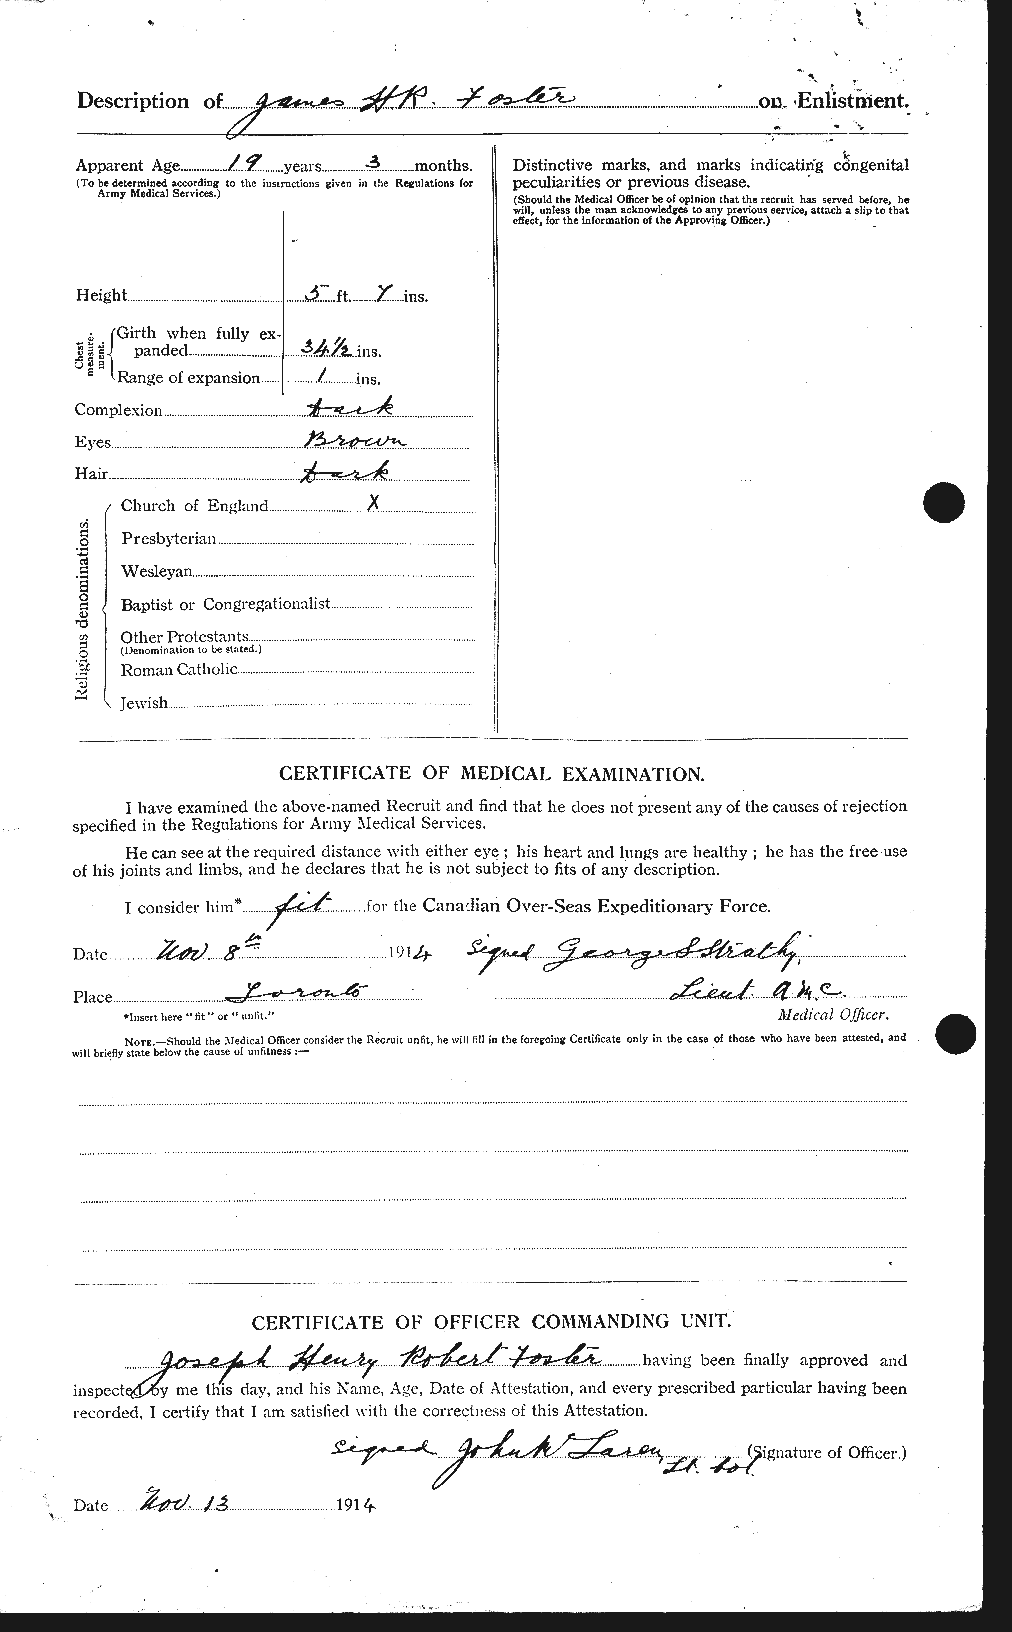 Personnel Records of the First World War - CEF 333307b